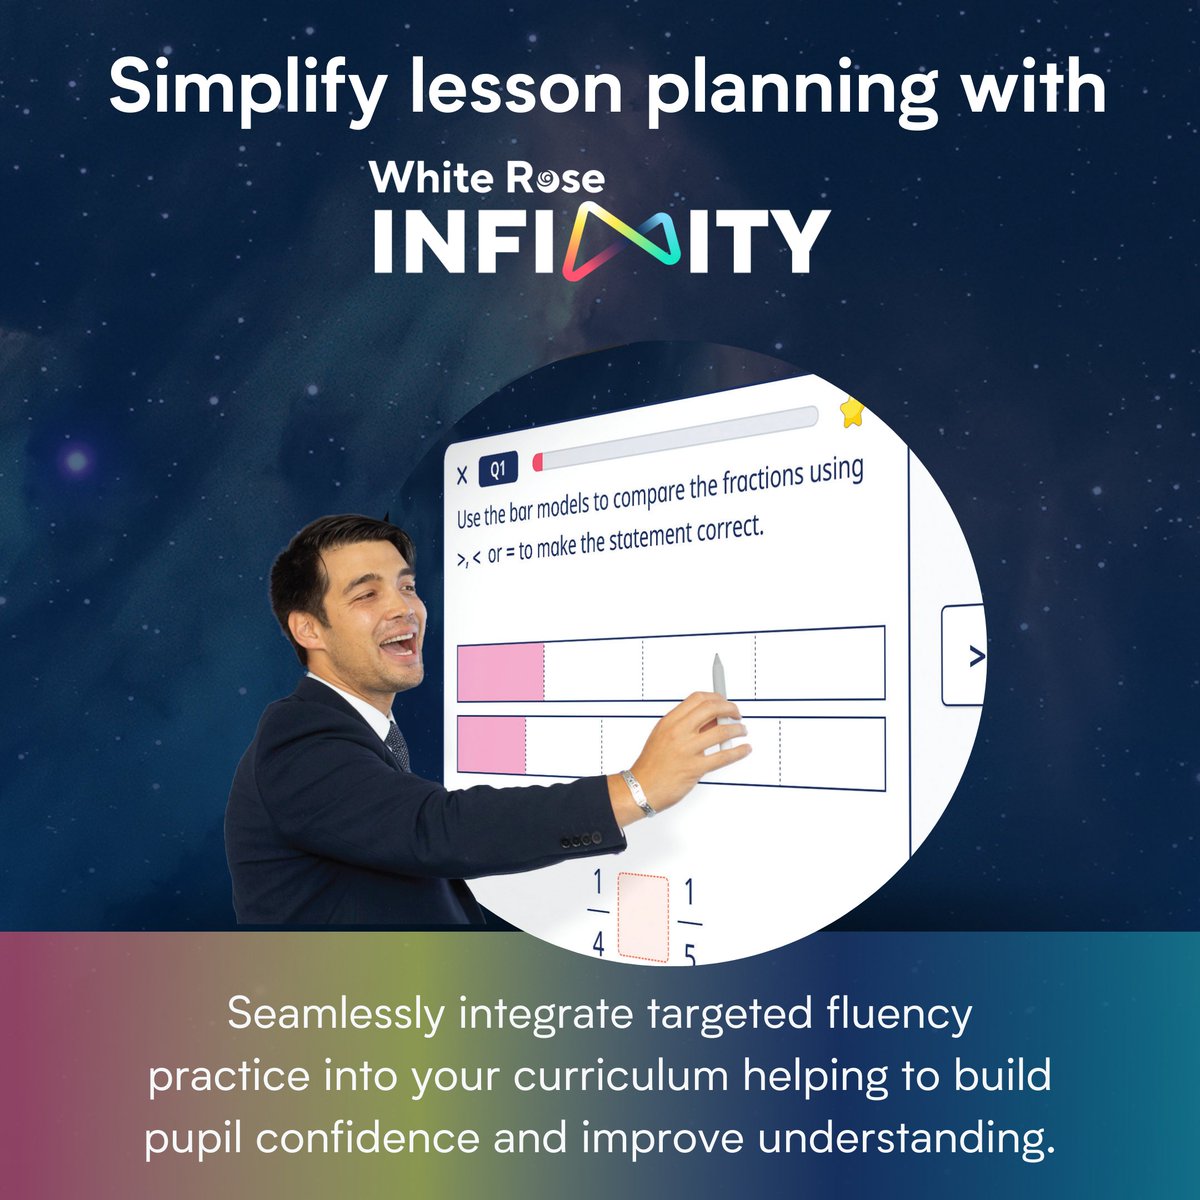 Simplify lesson planning with White Rose Infinity 🤩 With our game-changing new resource, teachers can seamlessly integrate targeted fluency practice into their curriculum helping build pupil confidence and improve understanding 🙌 See more: eu1.hubs.ly/H098wM00